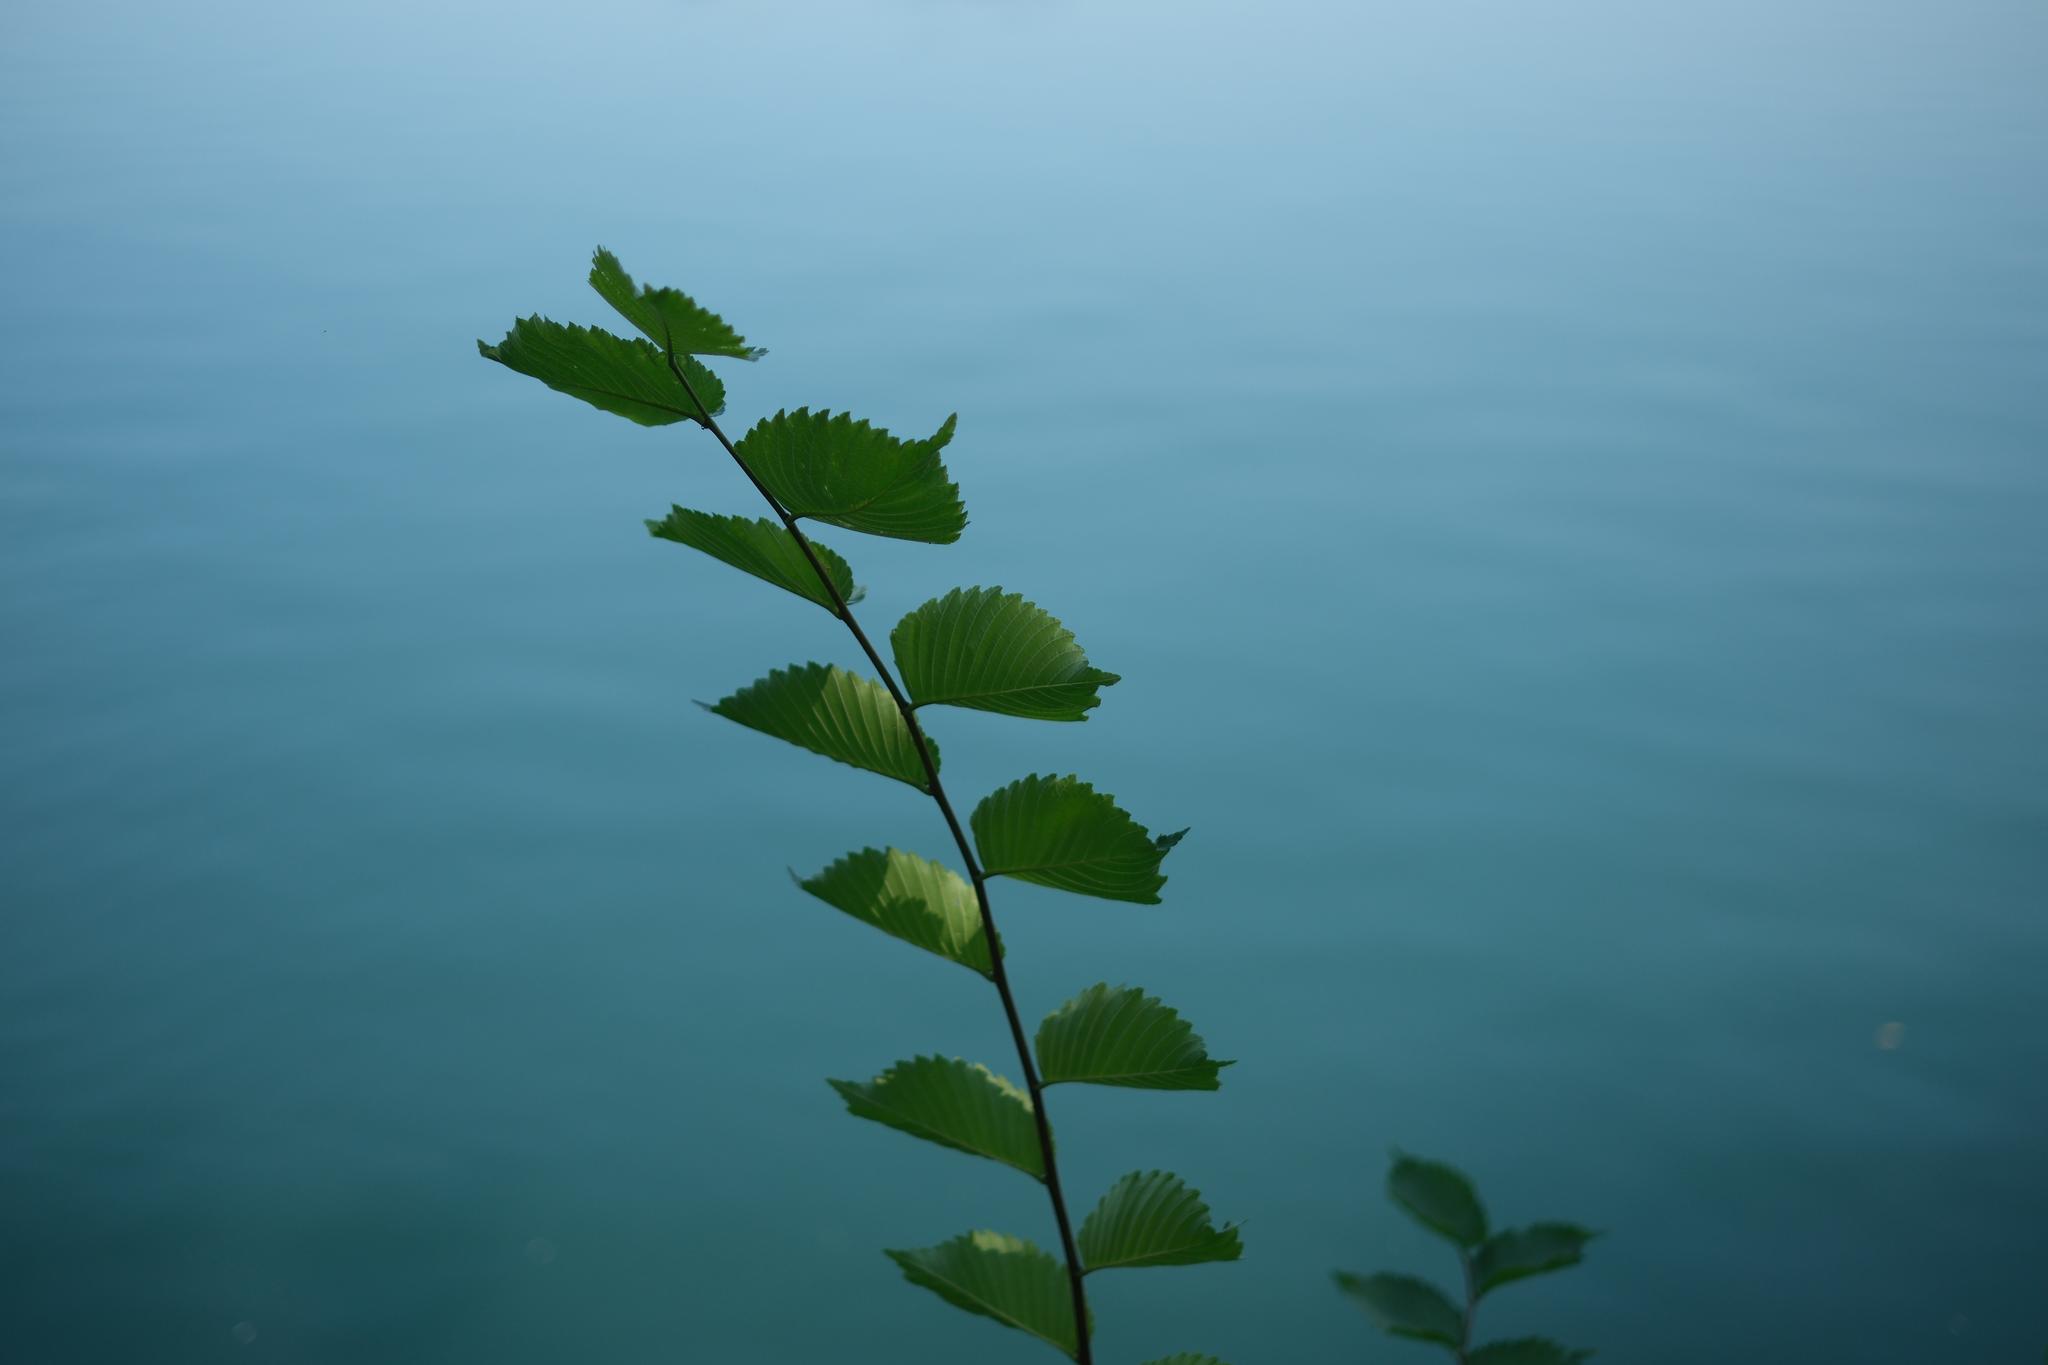 A green plant with small leaves against a calm, blue water background